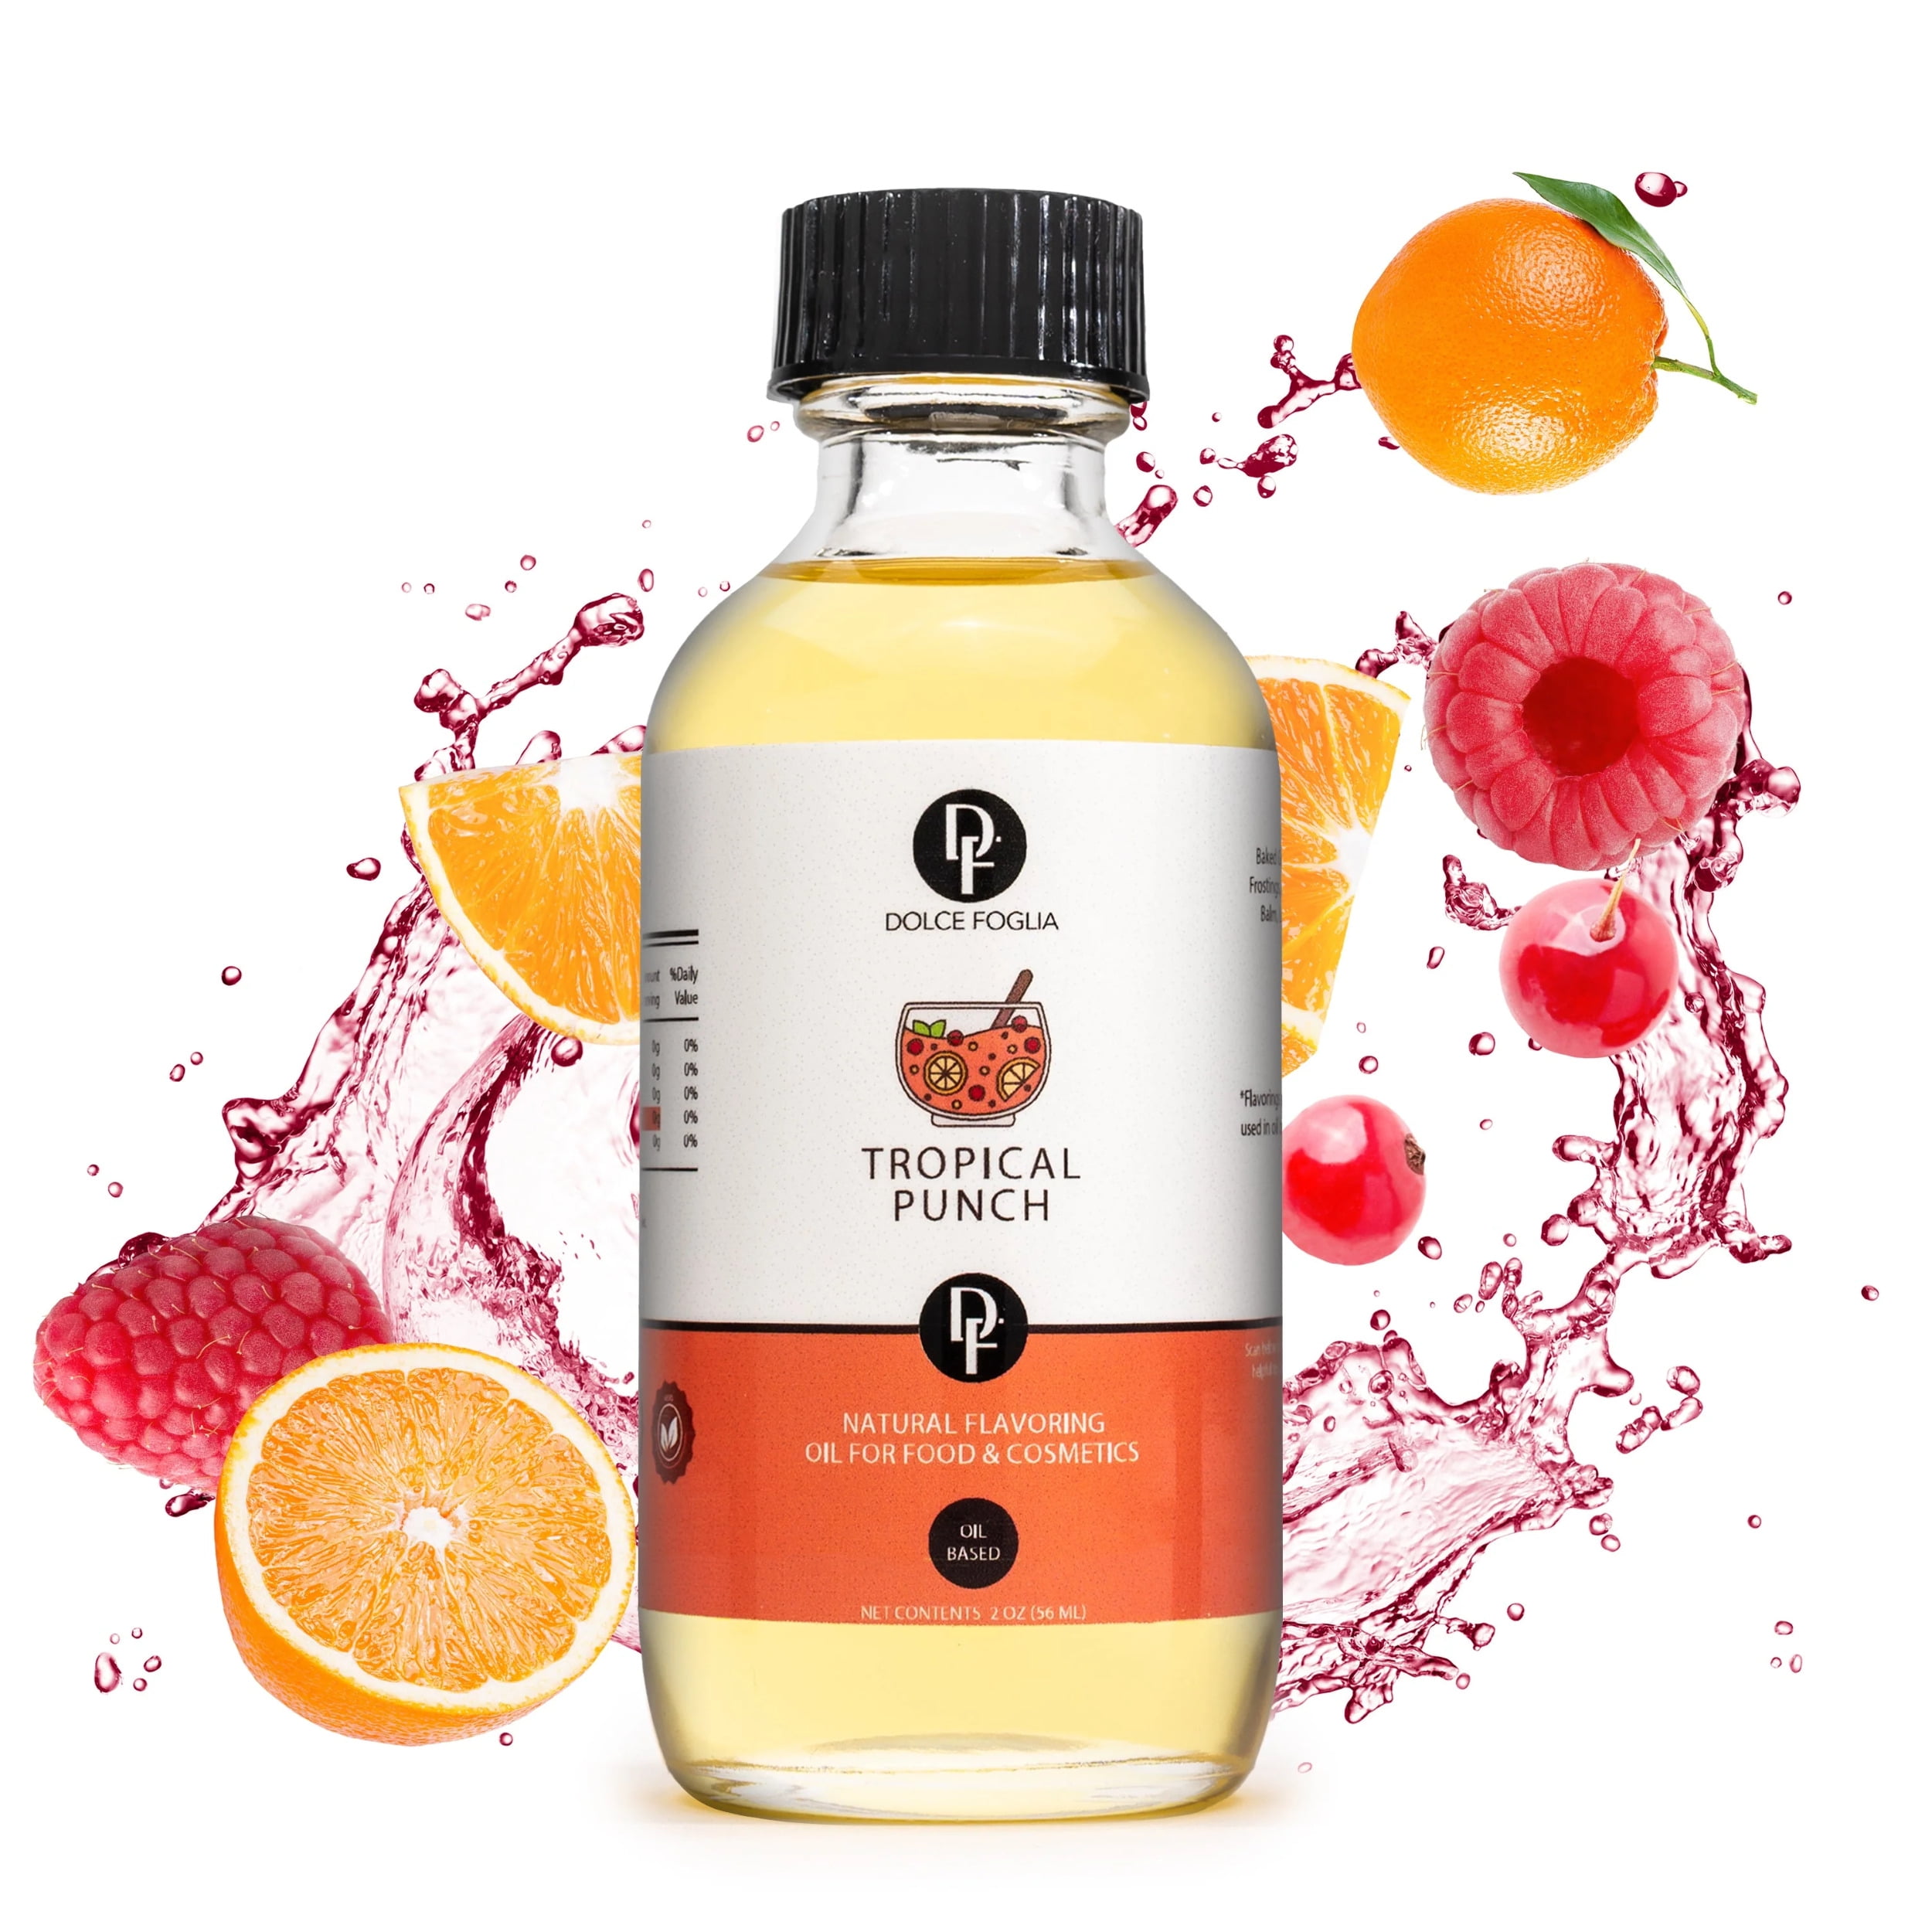 Dolce Foglia Tropical Punch Extract For Baking, Candy and